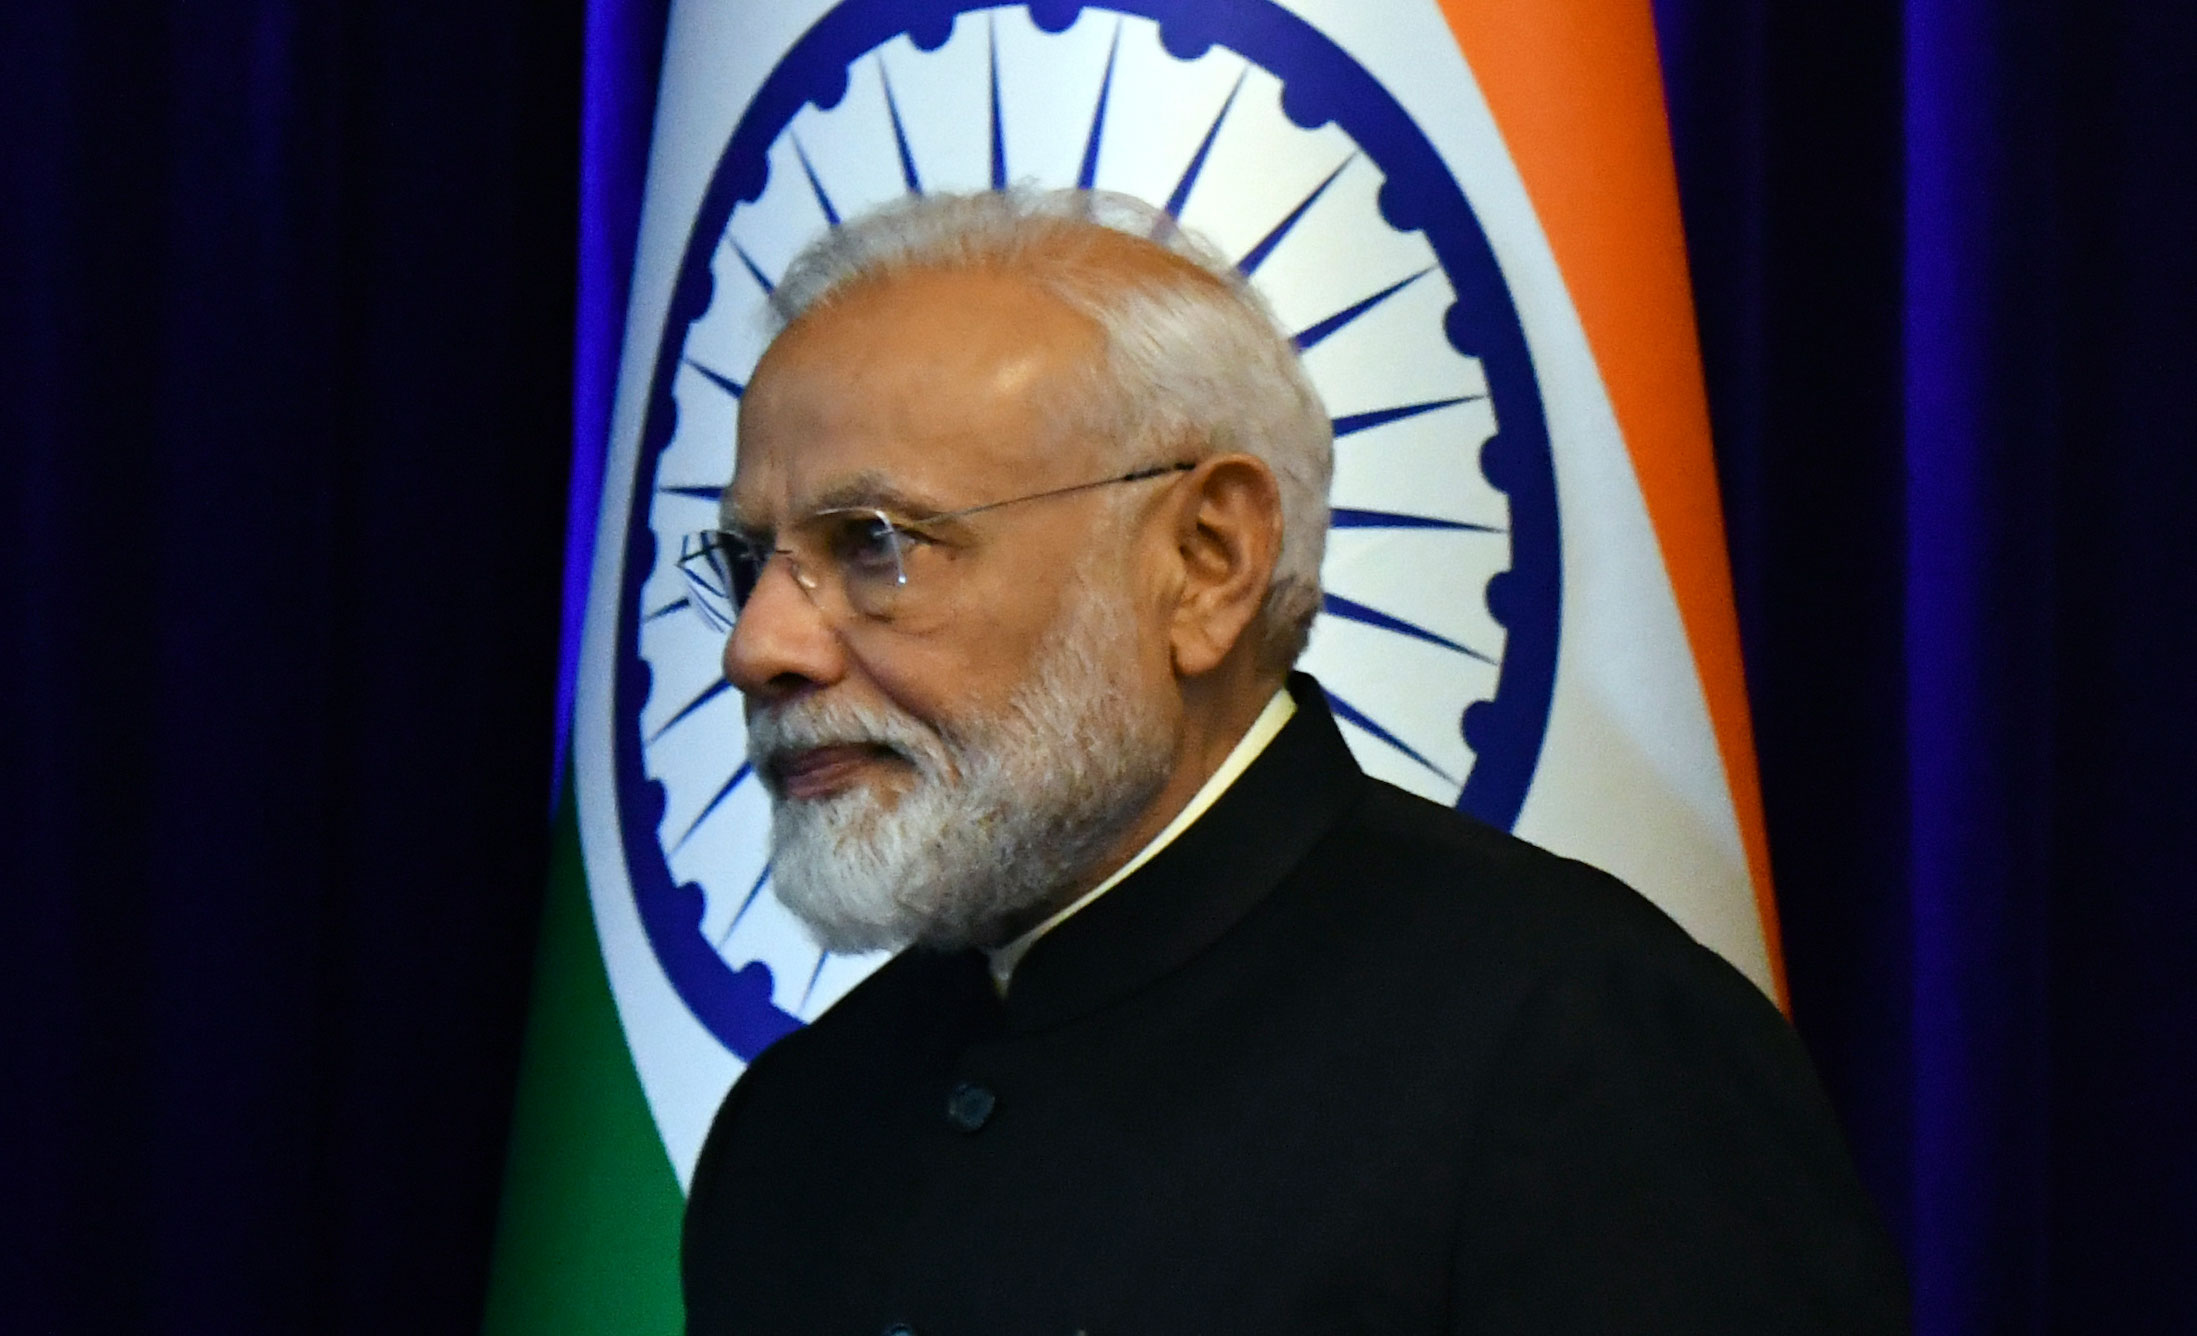 Modi spoke at length about the troubled state in his monthly radio address Mann Ki Baat, claiming the government’s “back to village” programme had evoked enthusiastic participation even in turbulent districts like Shopian, Pulwama, Kulgam and Anantnag.
